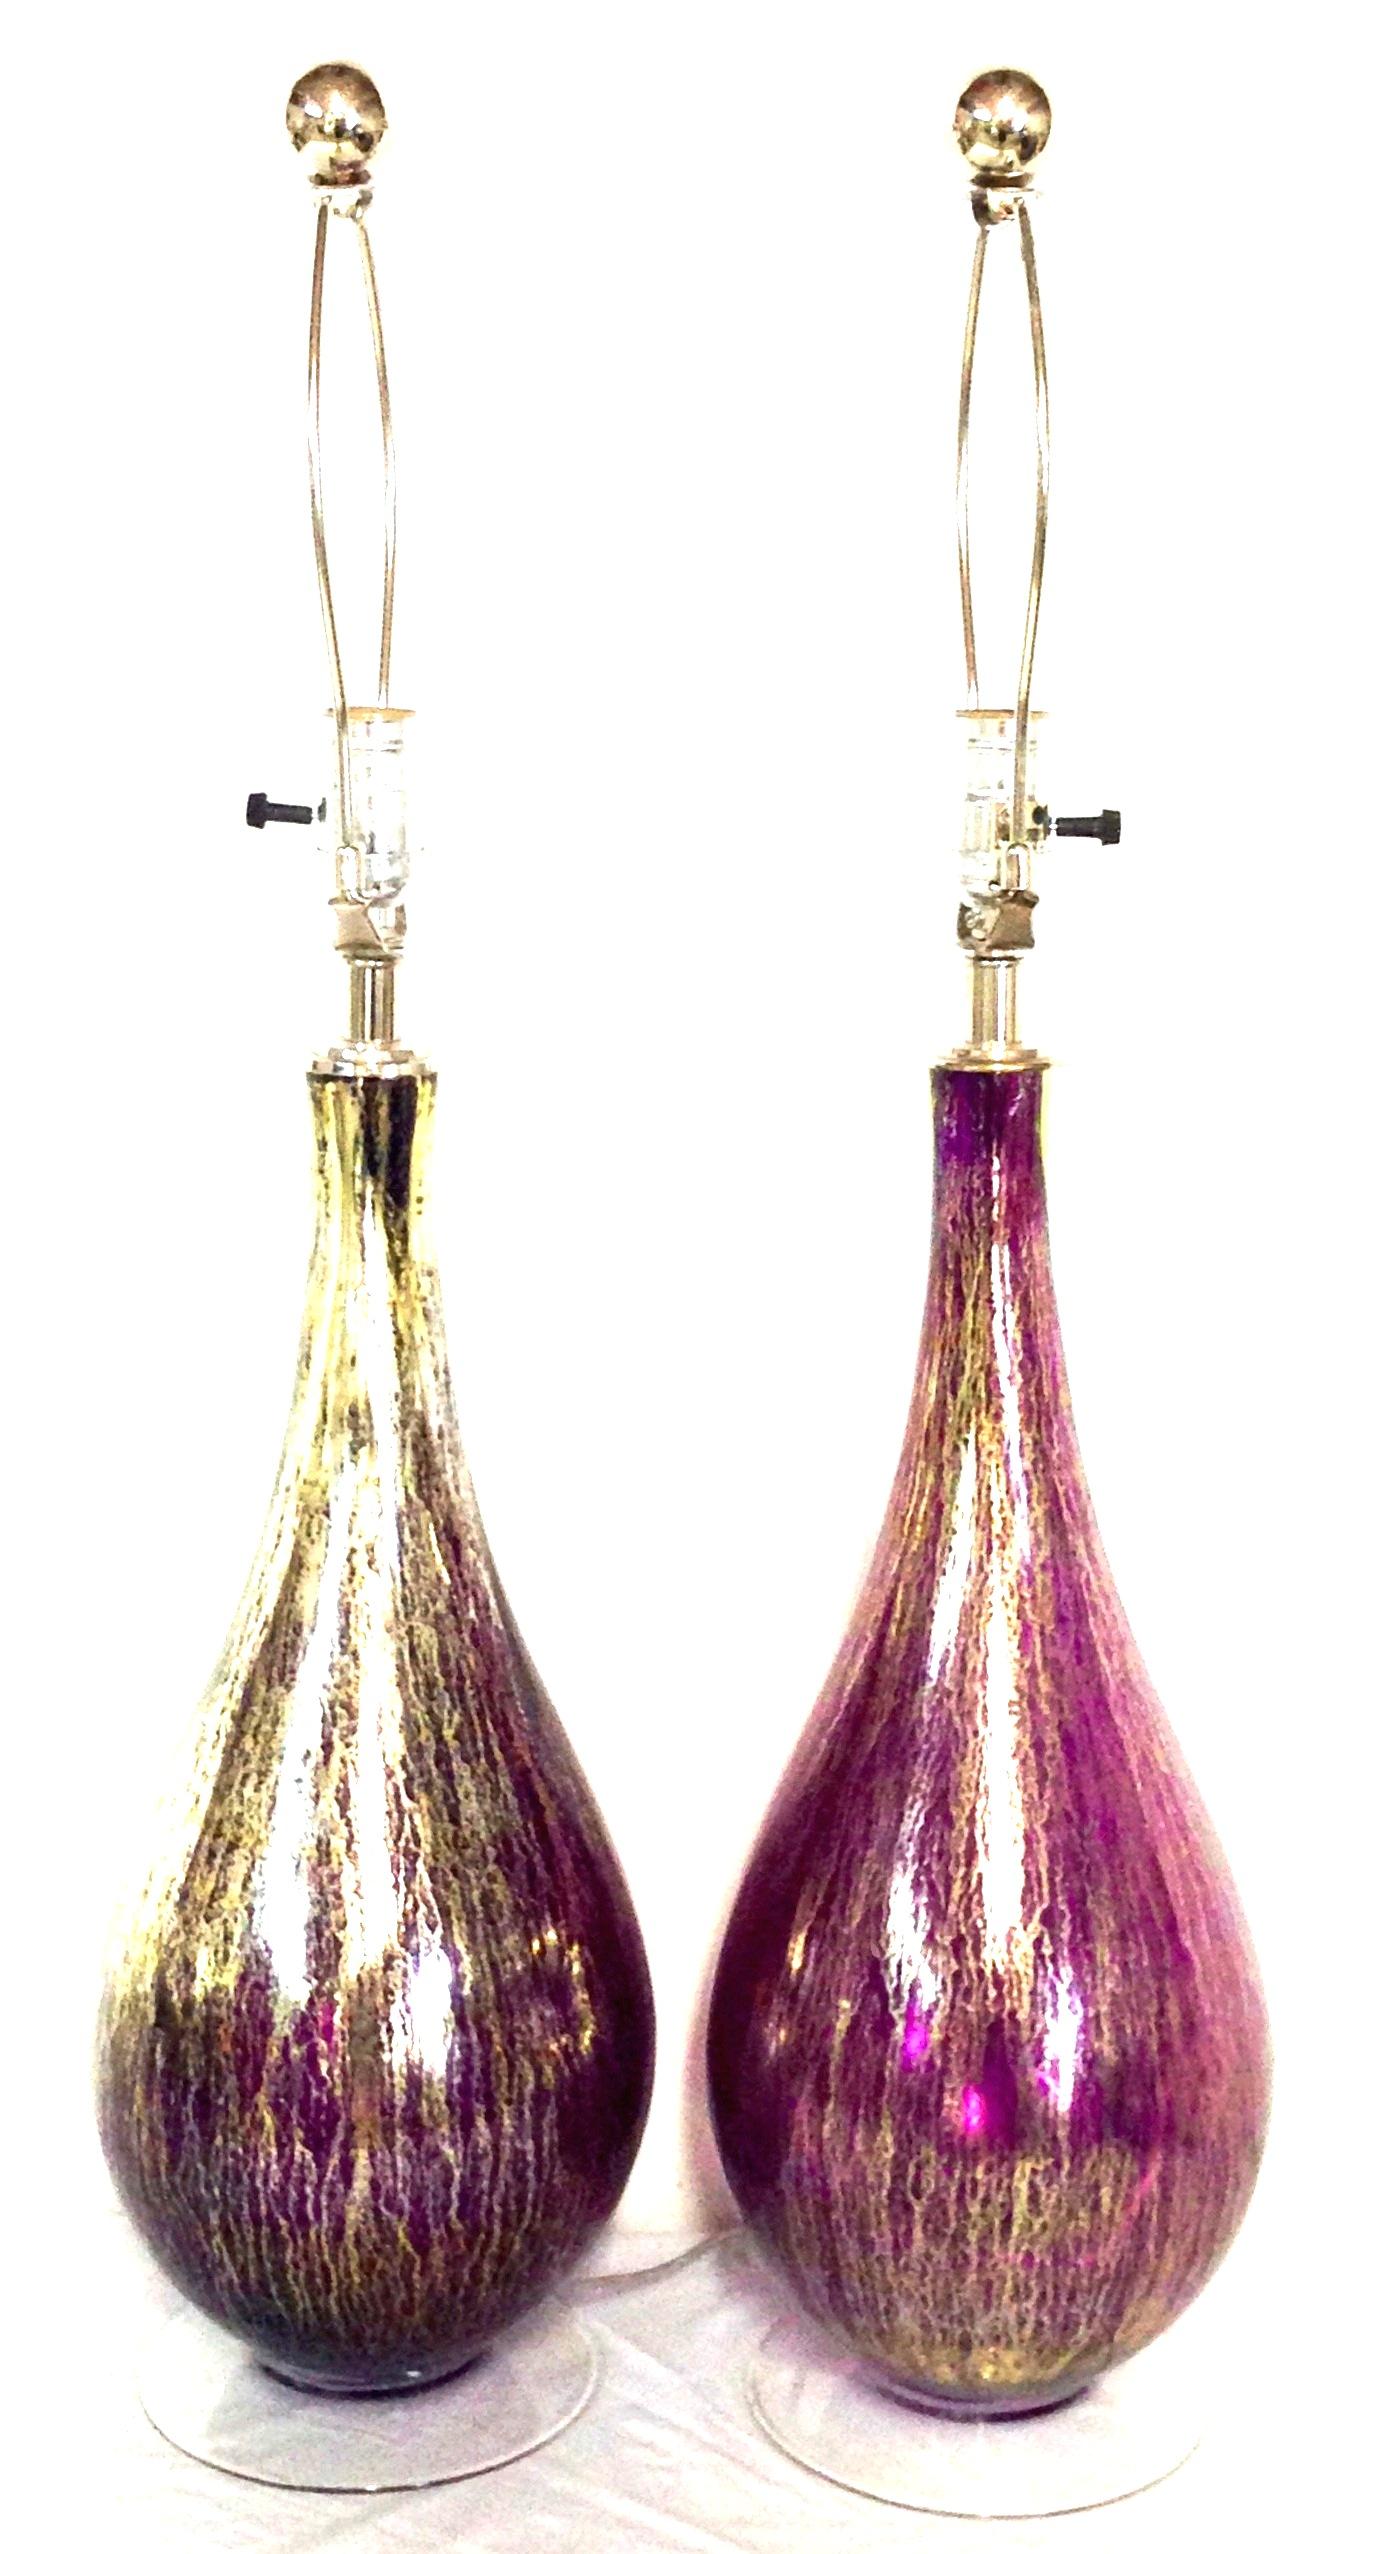 21st Century Murano style pair of Two blown glass amethyst and 22-karat gold infused table lamps. This pair of new and finely crafted blown glass lamps feature a deep, vivid amethyst tone with gold infused body, clear glass base and silver chromed